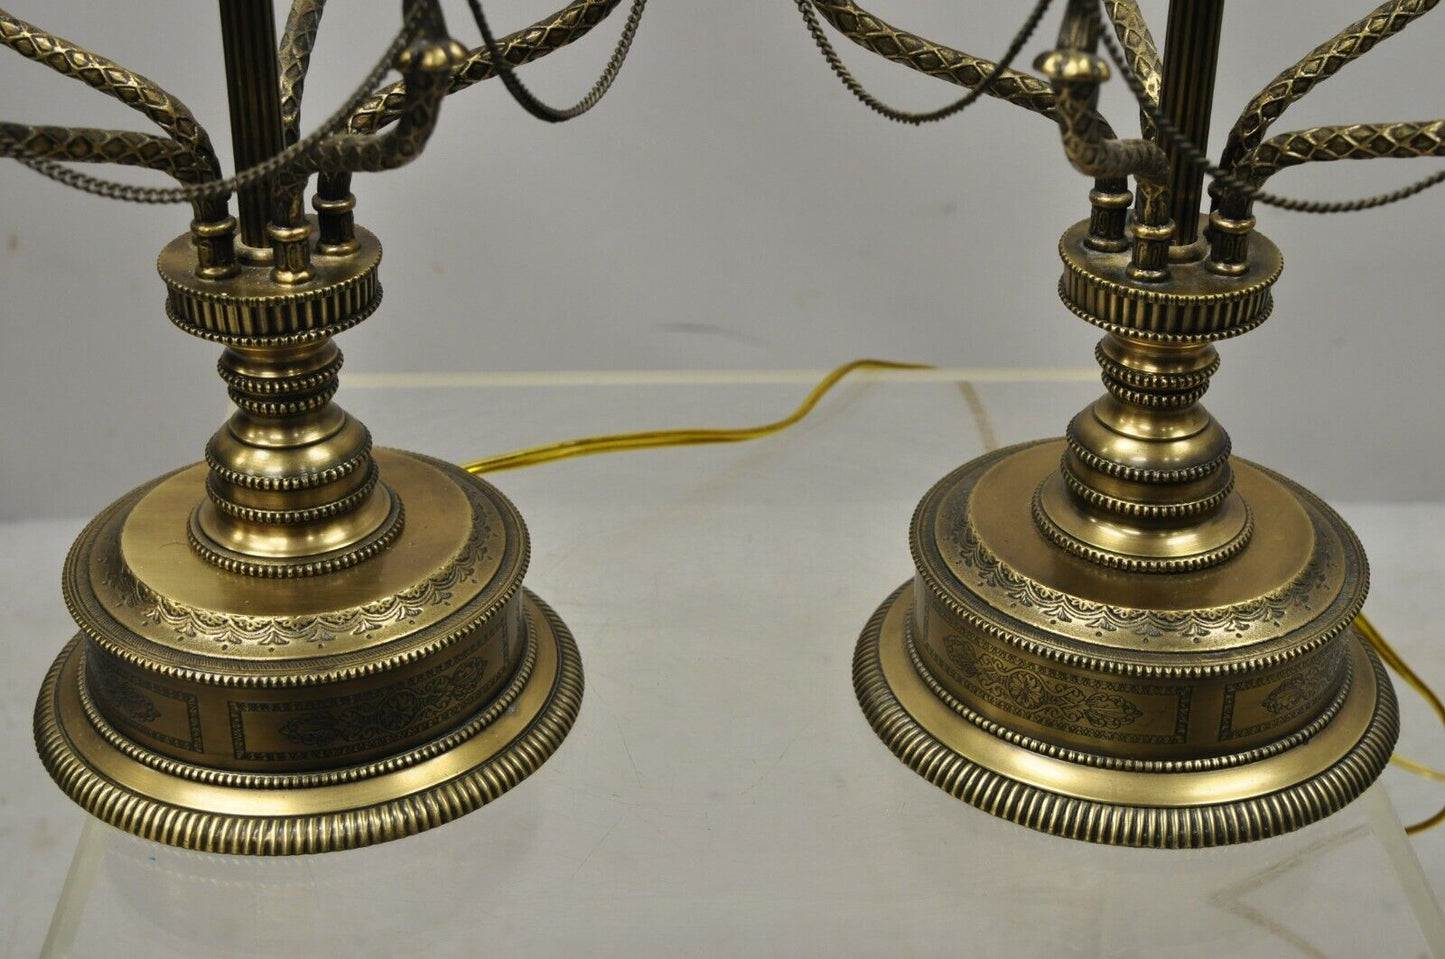 French Empire Style Brass Figural Bird Swan Candelabra Table Lamps - a Pair